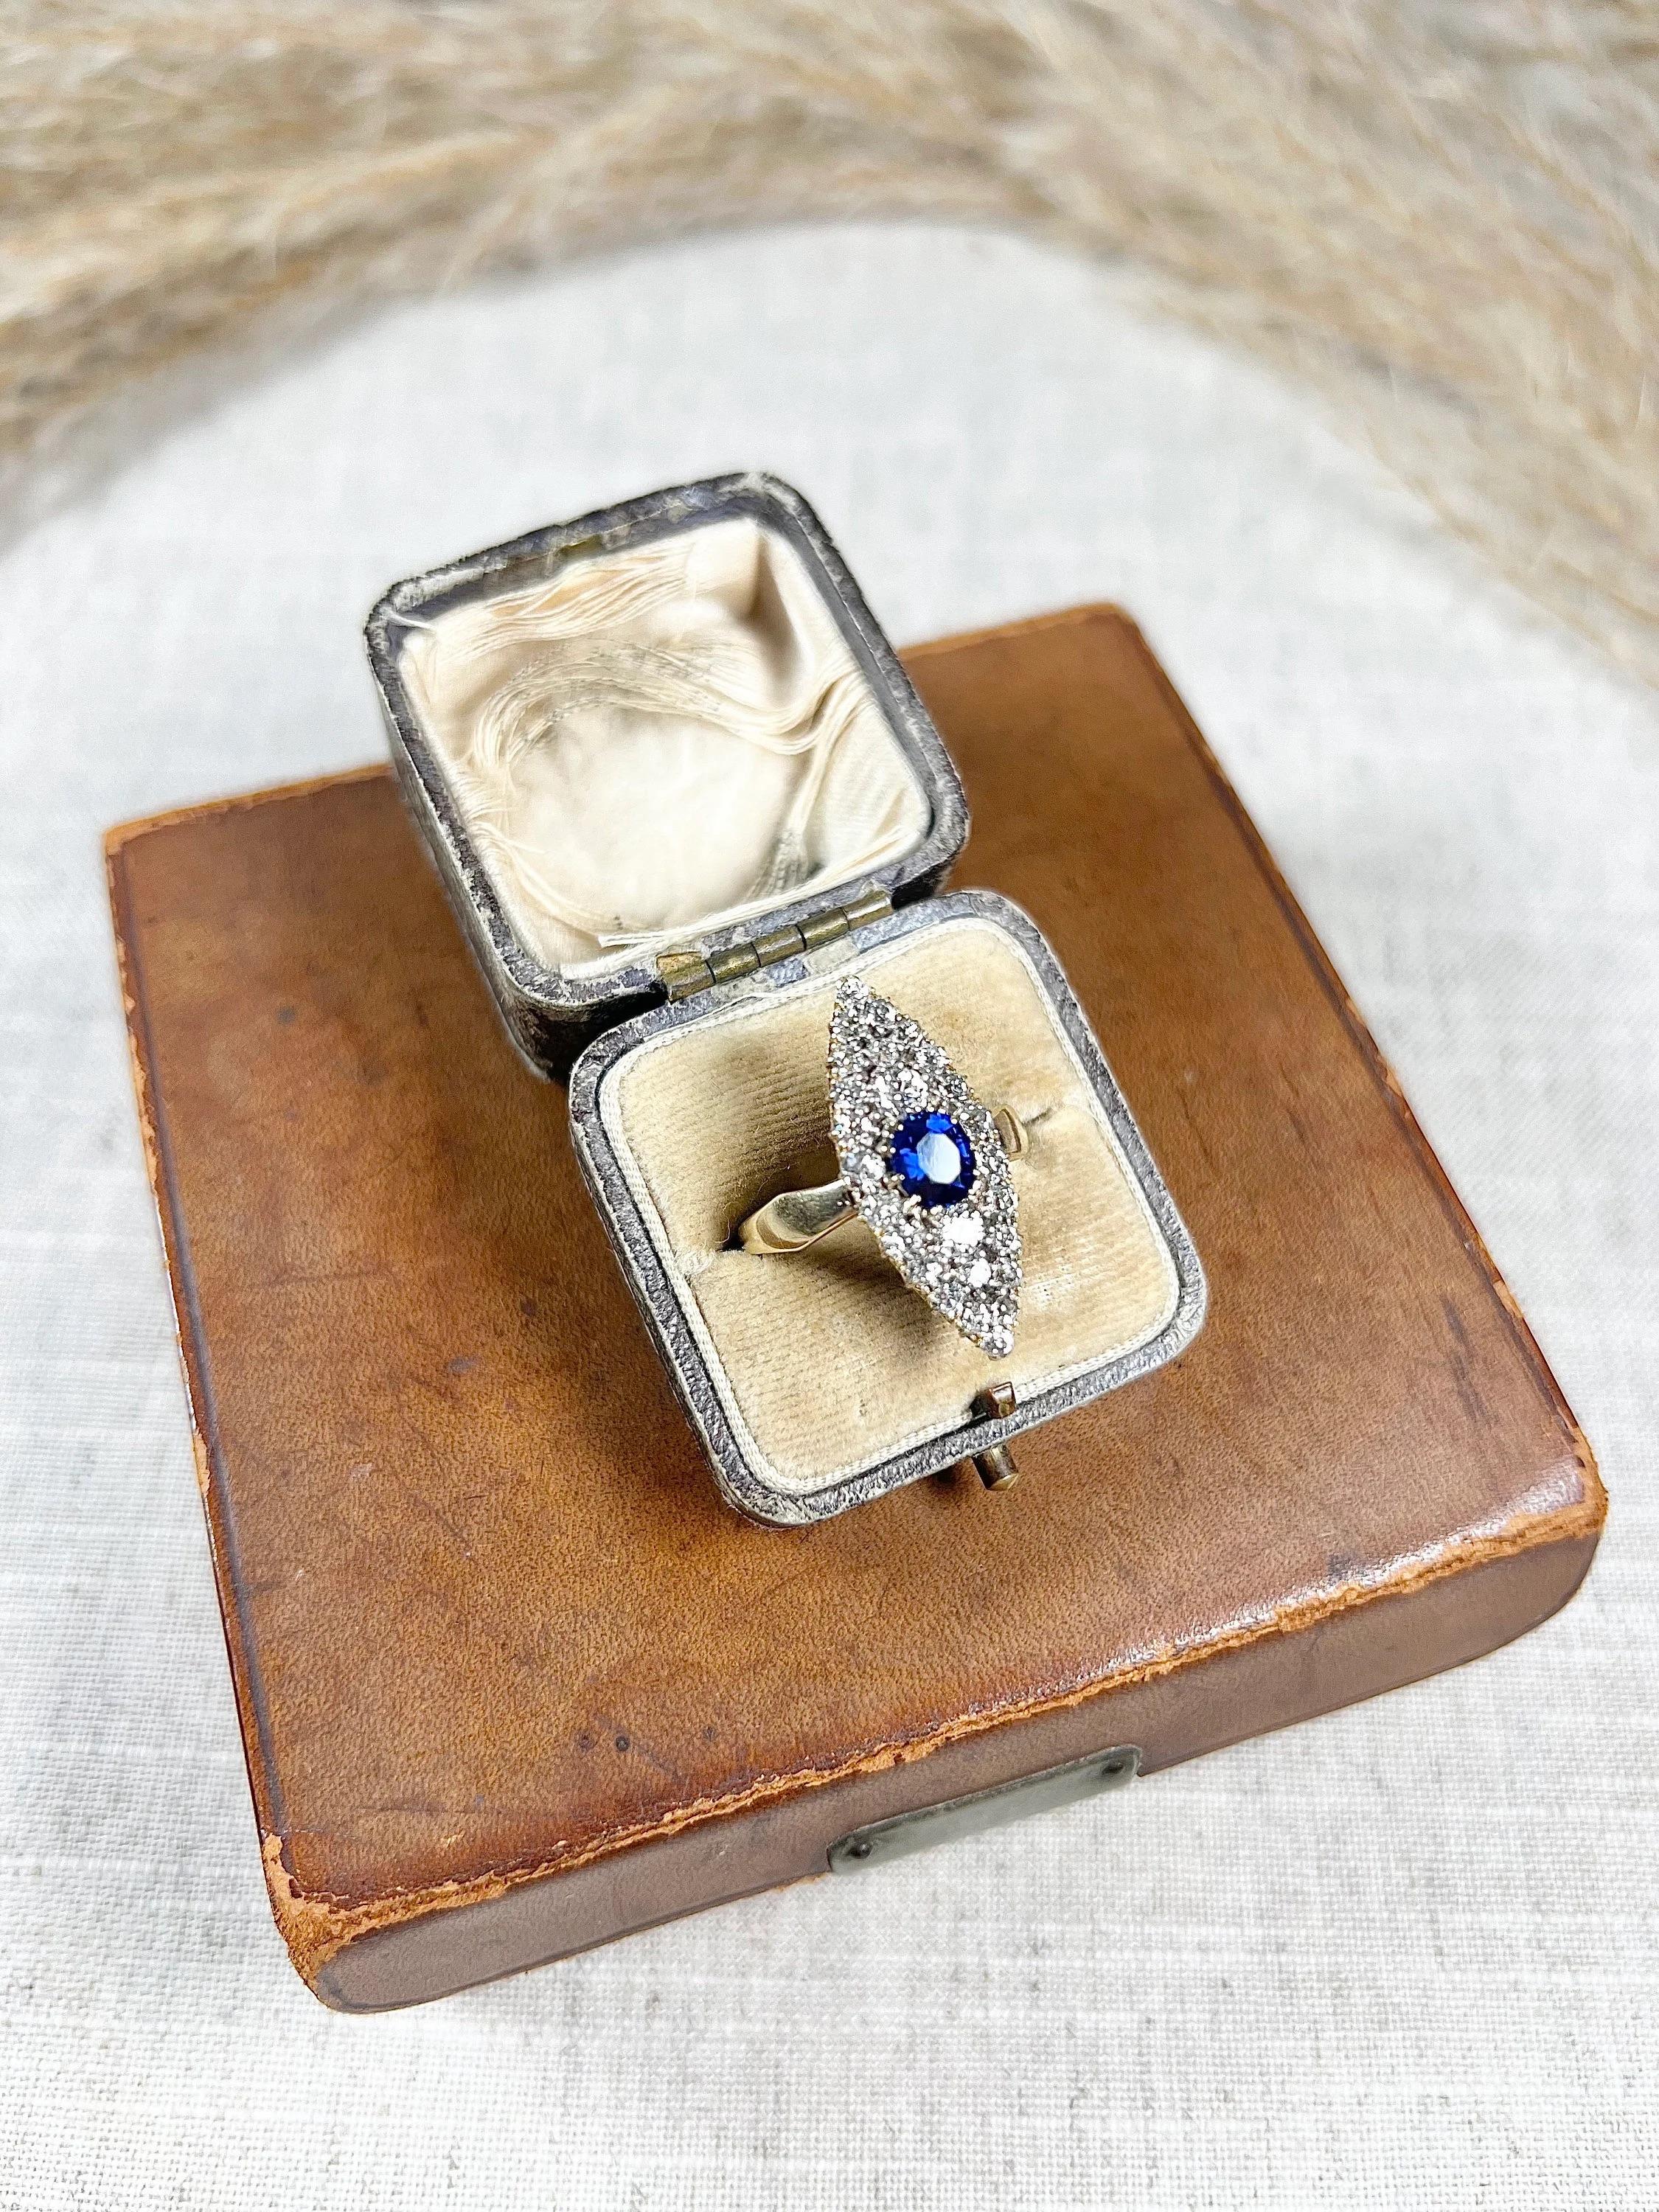 Antique Sapphire Marquise Ring 

18ct Gold Tested

Circa 1870s

This stunning Victorian ring is crafted from 18ct gold and features a marquise shape adorned with an exquisite oval, faceted natural sapphire at its centre. Surrounding the sapphire are